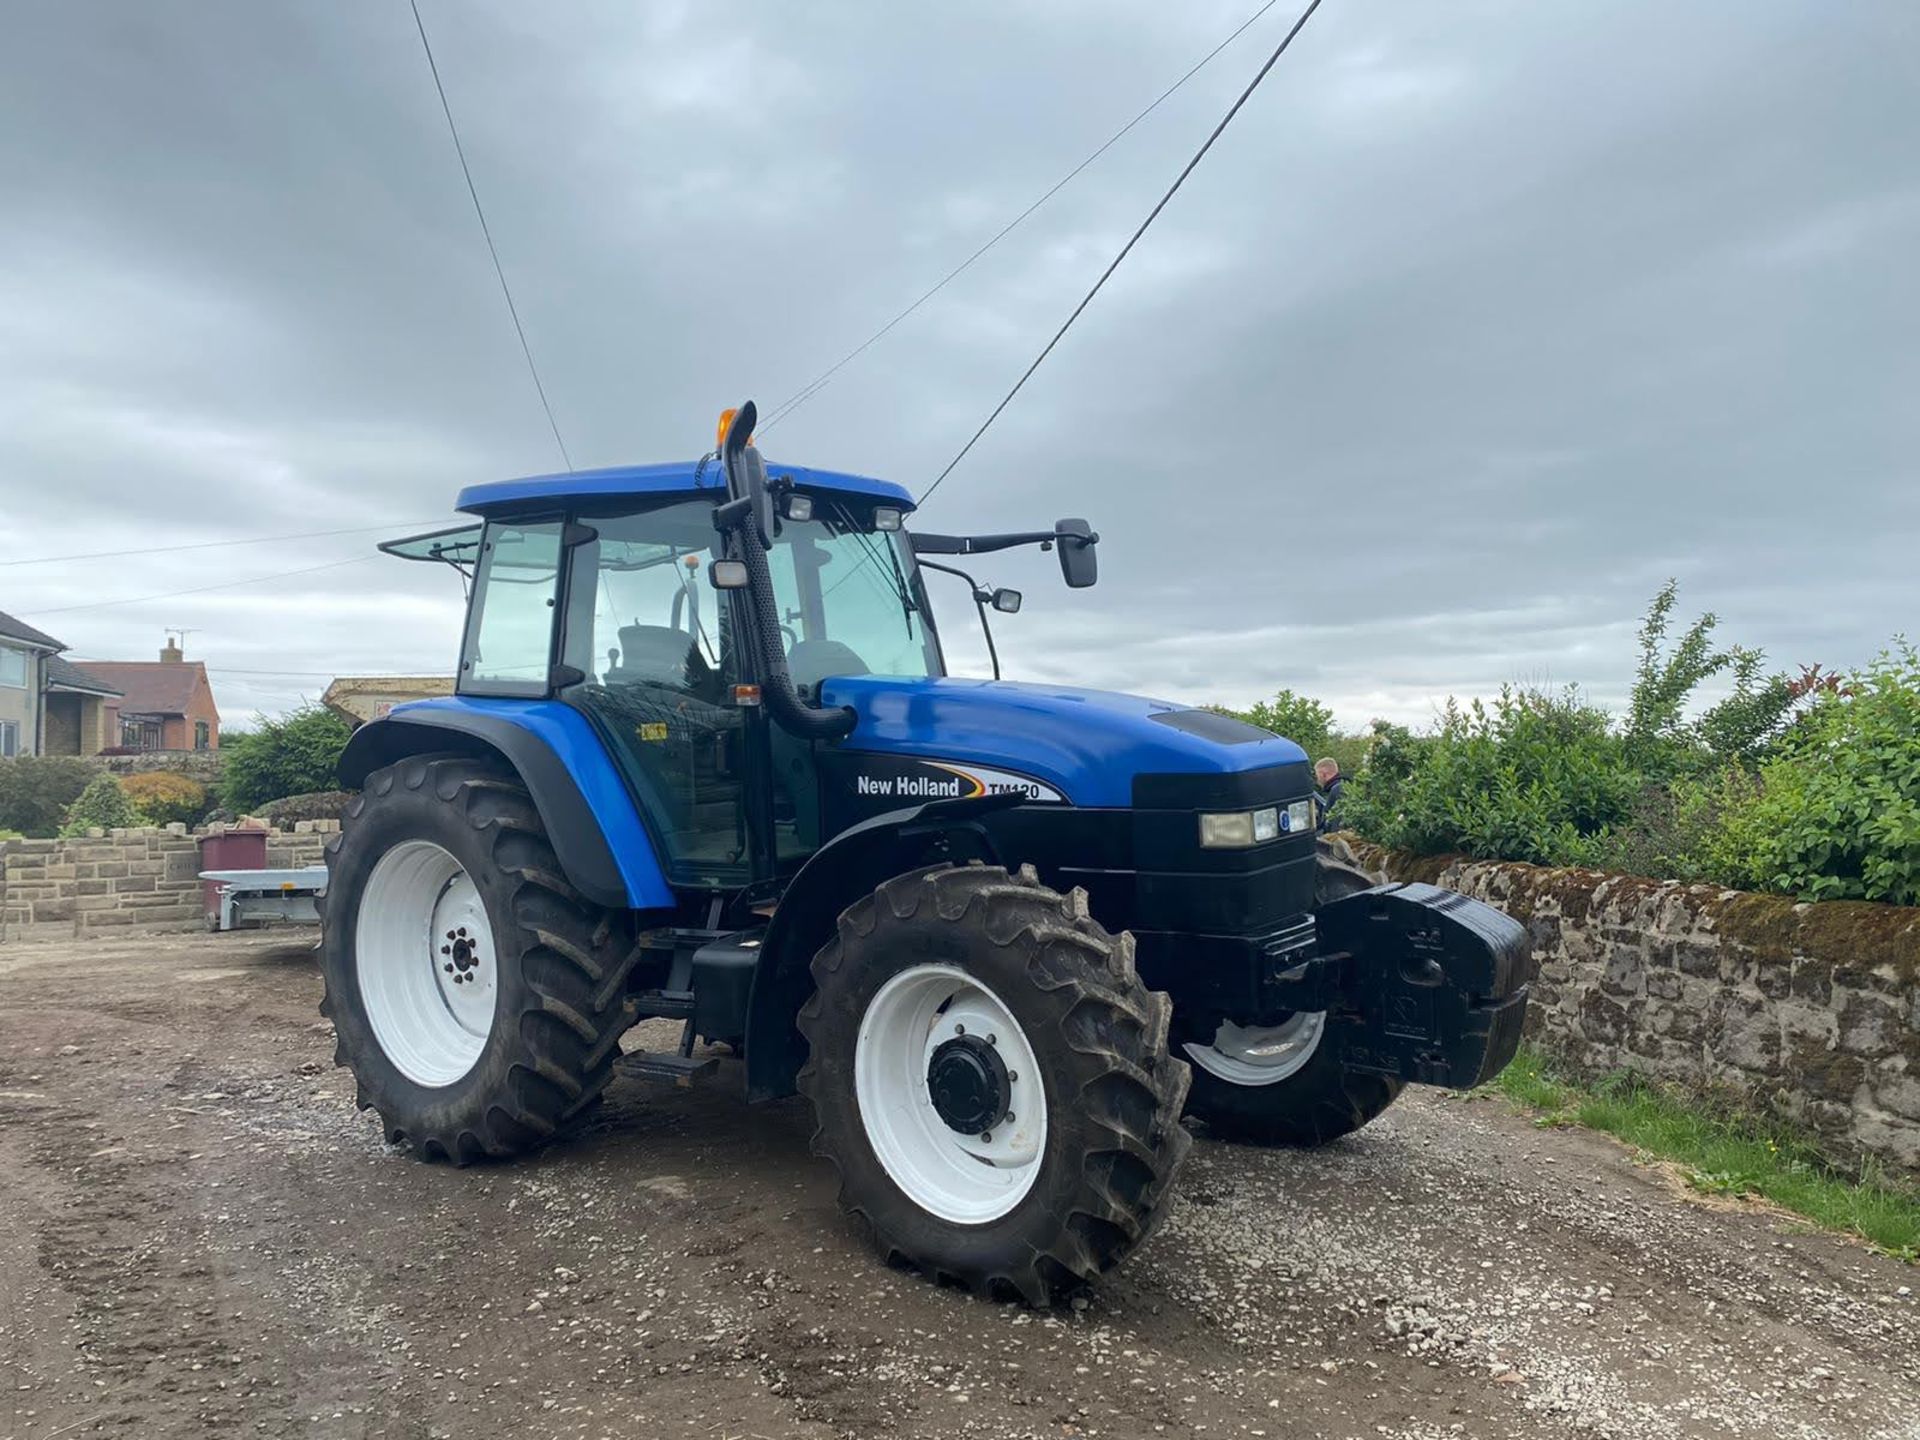 NEW HOLLAND TM120 TRACTOR, 4 WHEEL DRIVE, LOW HOURS ONLY 6128 GENUINE, MANUAL GEARBOX *PLUS VAT*